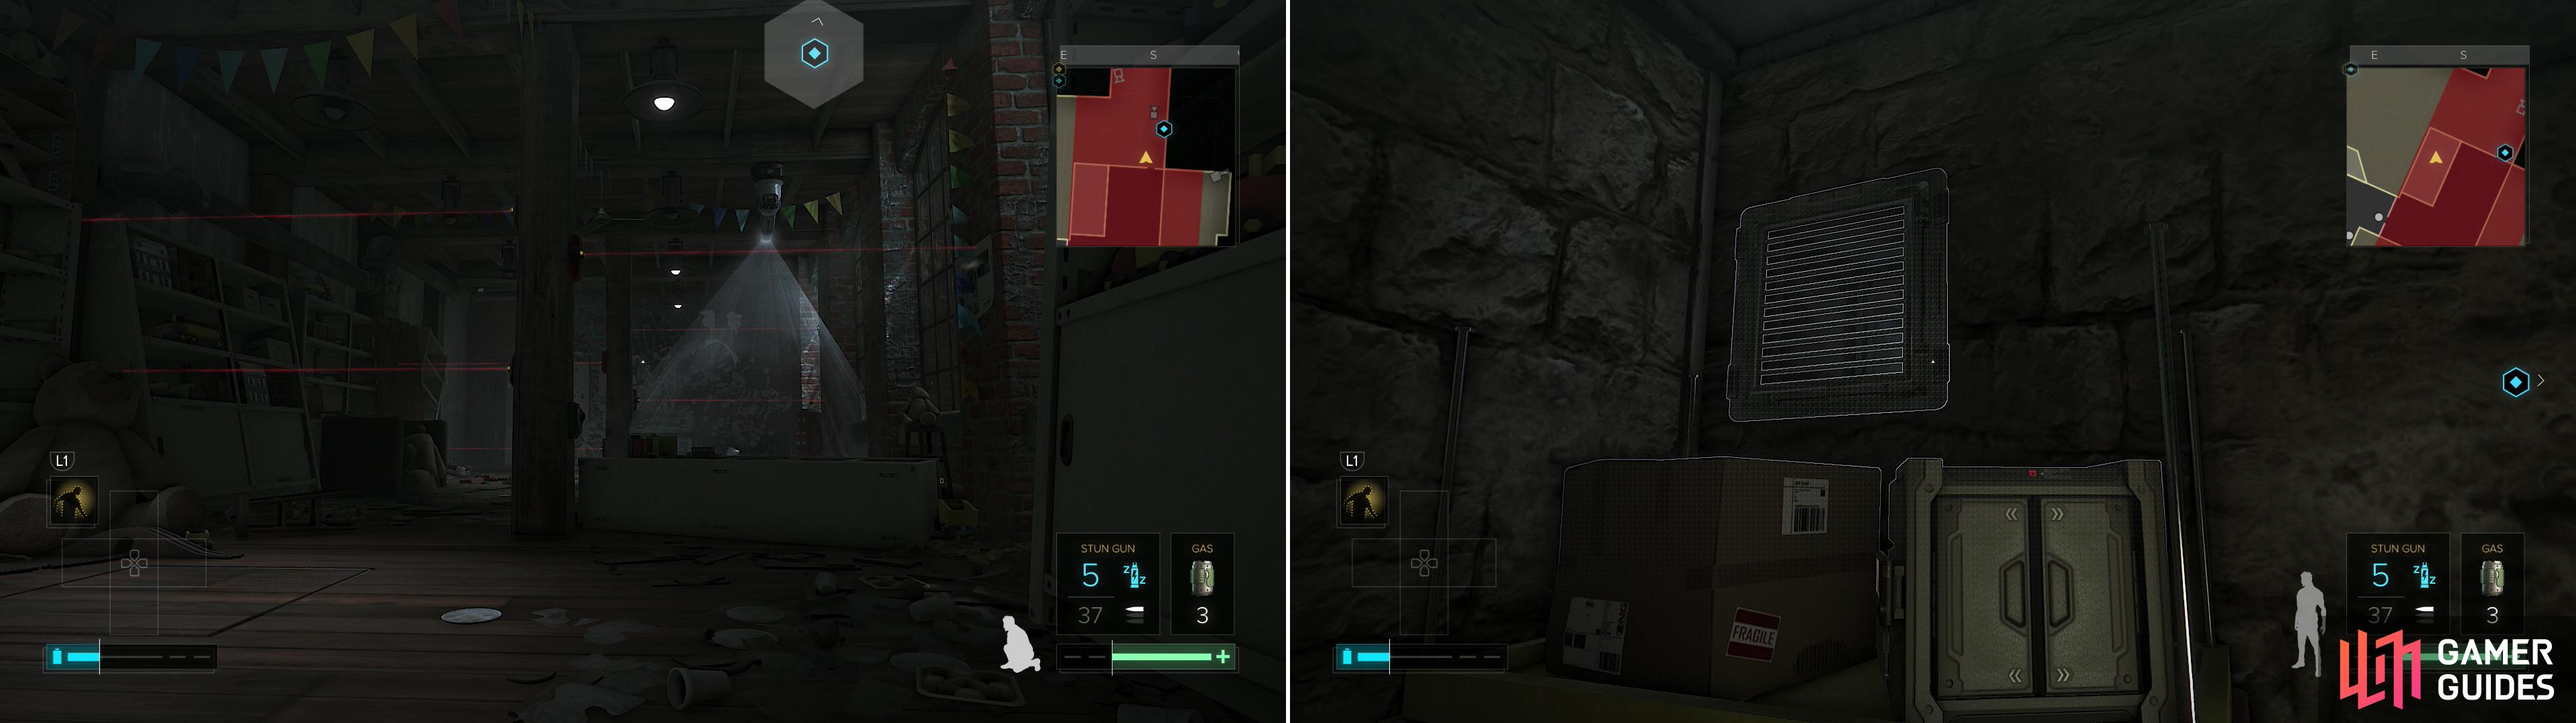 You can either enter the front door and sneak through all the security (left) or just climb through a vent and get right to your destination (right).